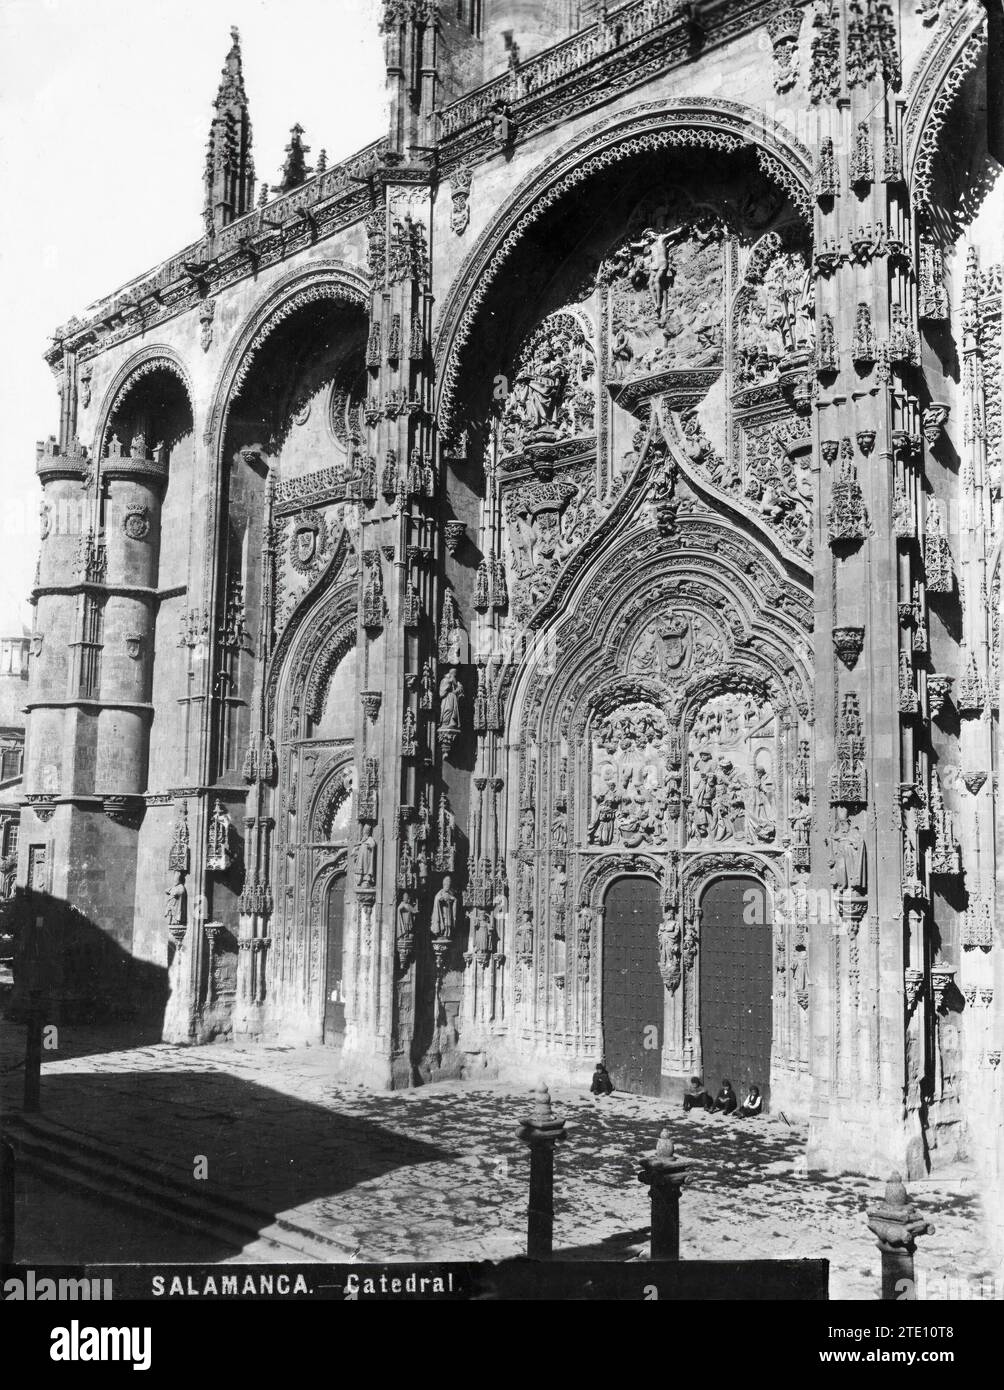 12/31/1932. New Cathedral. Main Facade.-Approximate date.-The photograph belongs to a series of Photos Dedicated to the Most Emblematic Buildings and Monuments of Salamanca.-On the back of the Photos two Stamps: Photo-Gombau and Vda.De Venancio Gombau.-The cathedral new It is, next to the Old Cathedral, one of the two Cathedrals of the city of Salamanca. It was built between the 16th and 18th centuries basically in two styles: late Gothic and Baroque. The main façade is, of its kind, one of the richest in Spain. It is made up of three semicircular arches corresponding to each of the naves. It Stock Photo